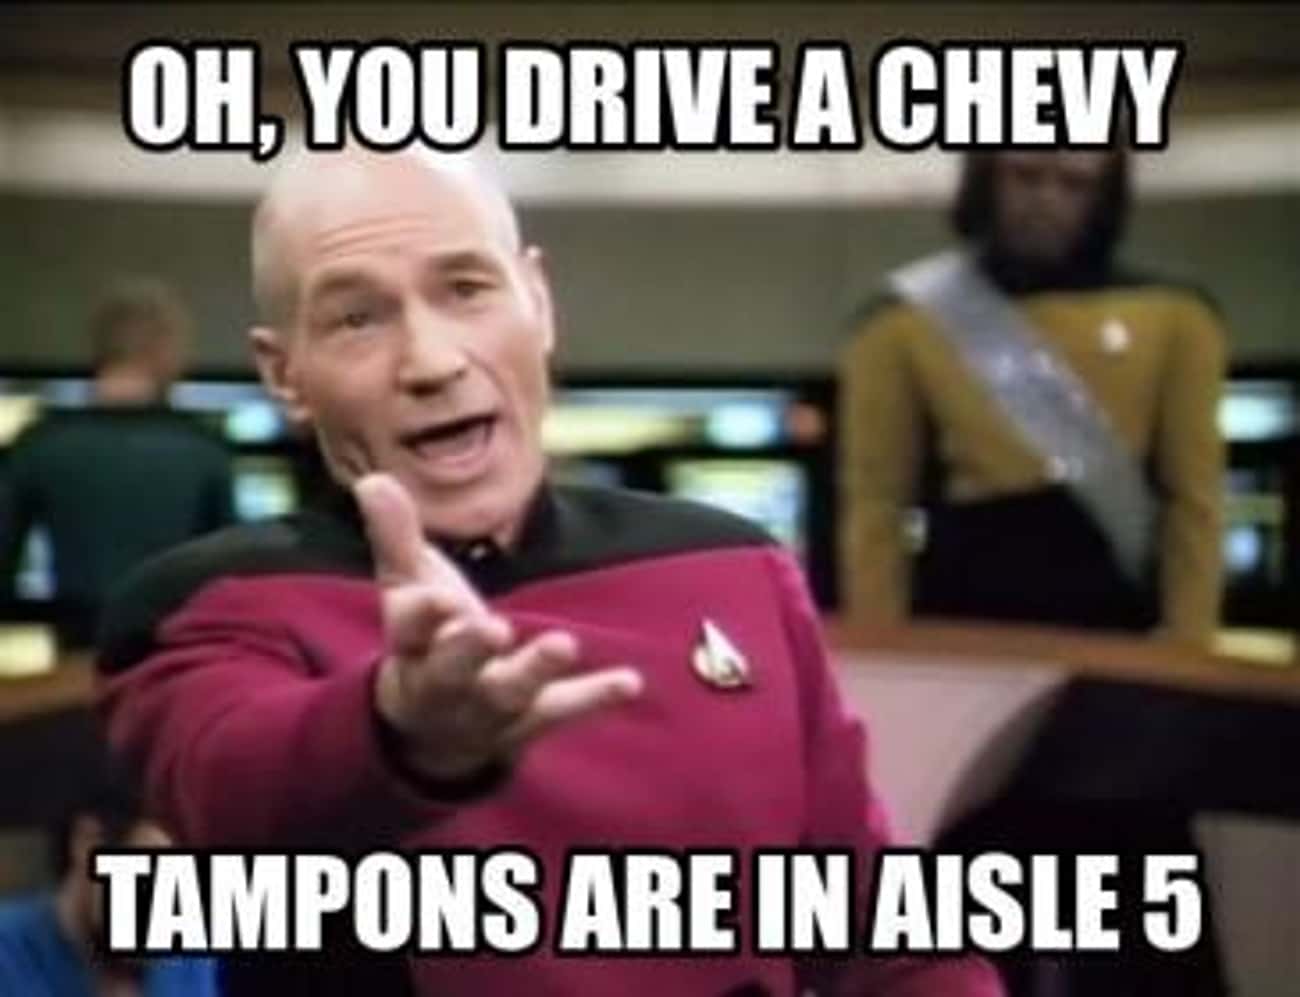 At least Chevy is lady-friendly